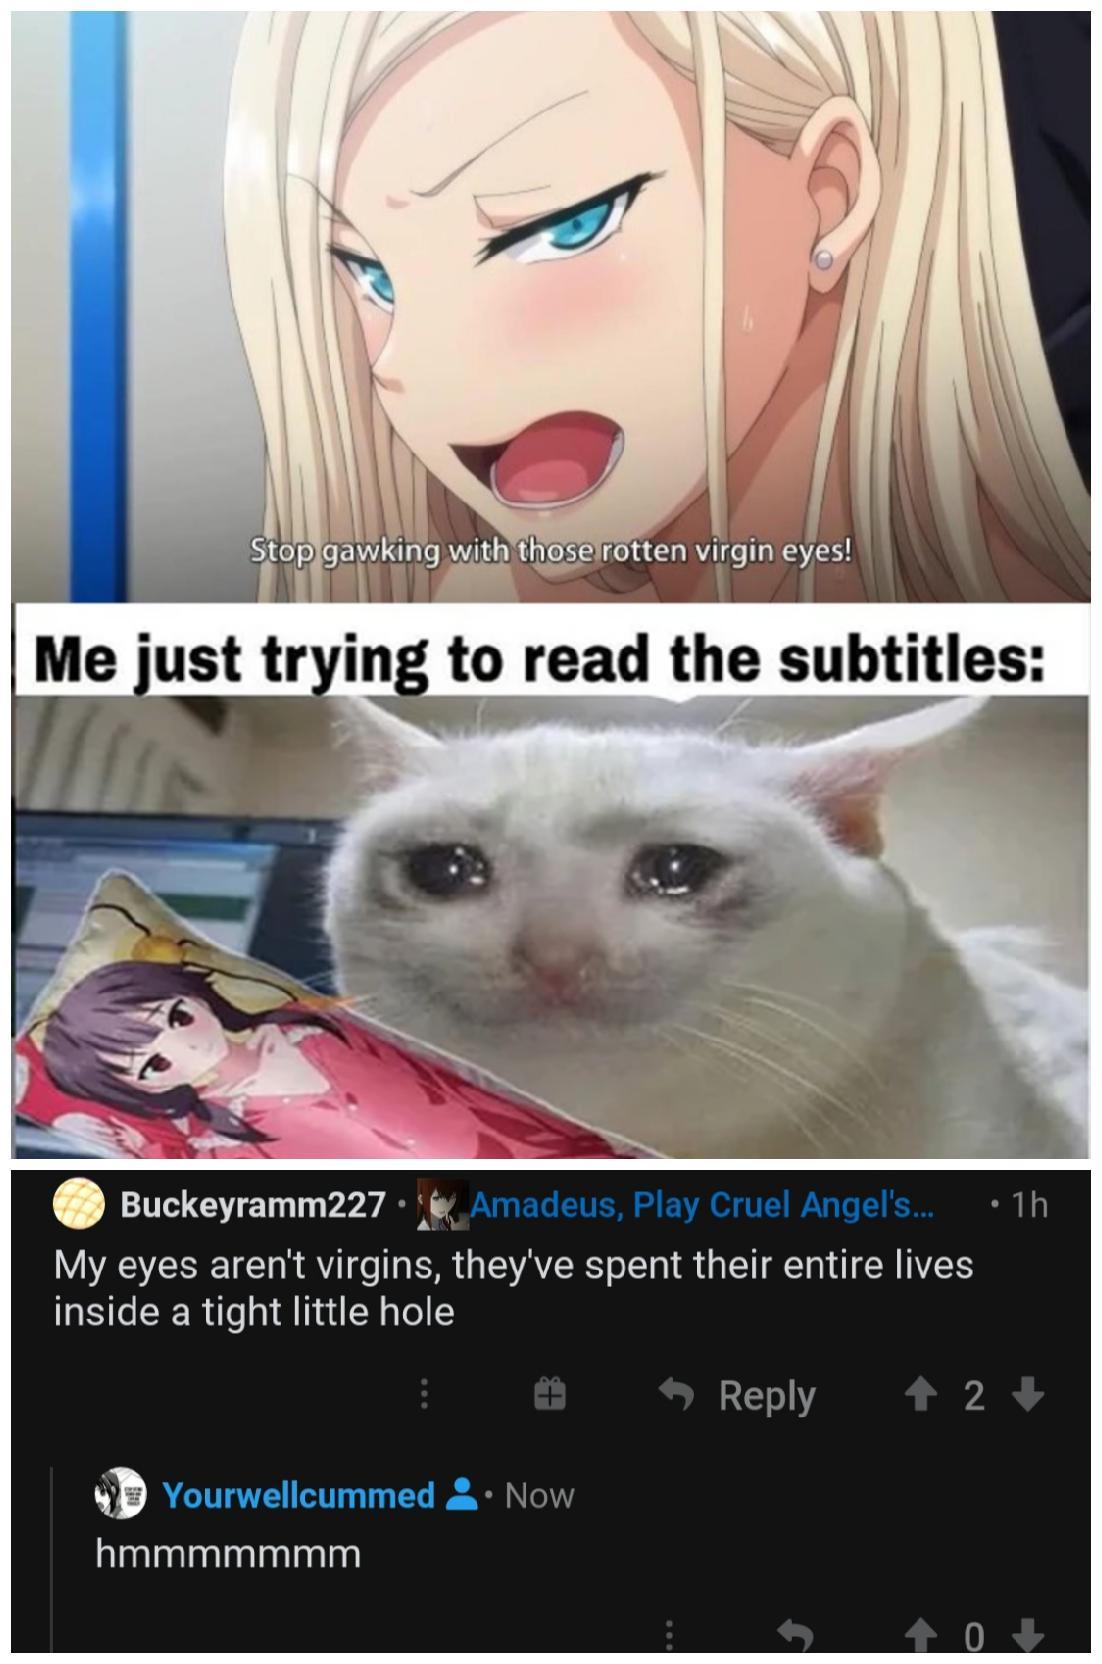 Jeez guys, stop looking at my meme with those lustful eyes